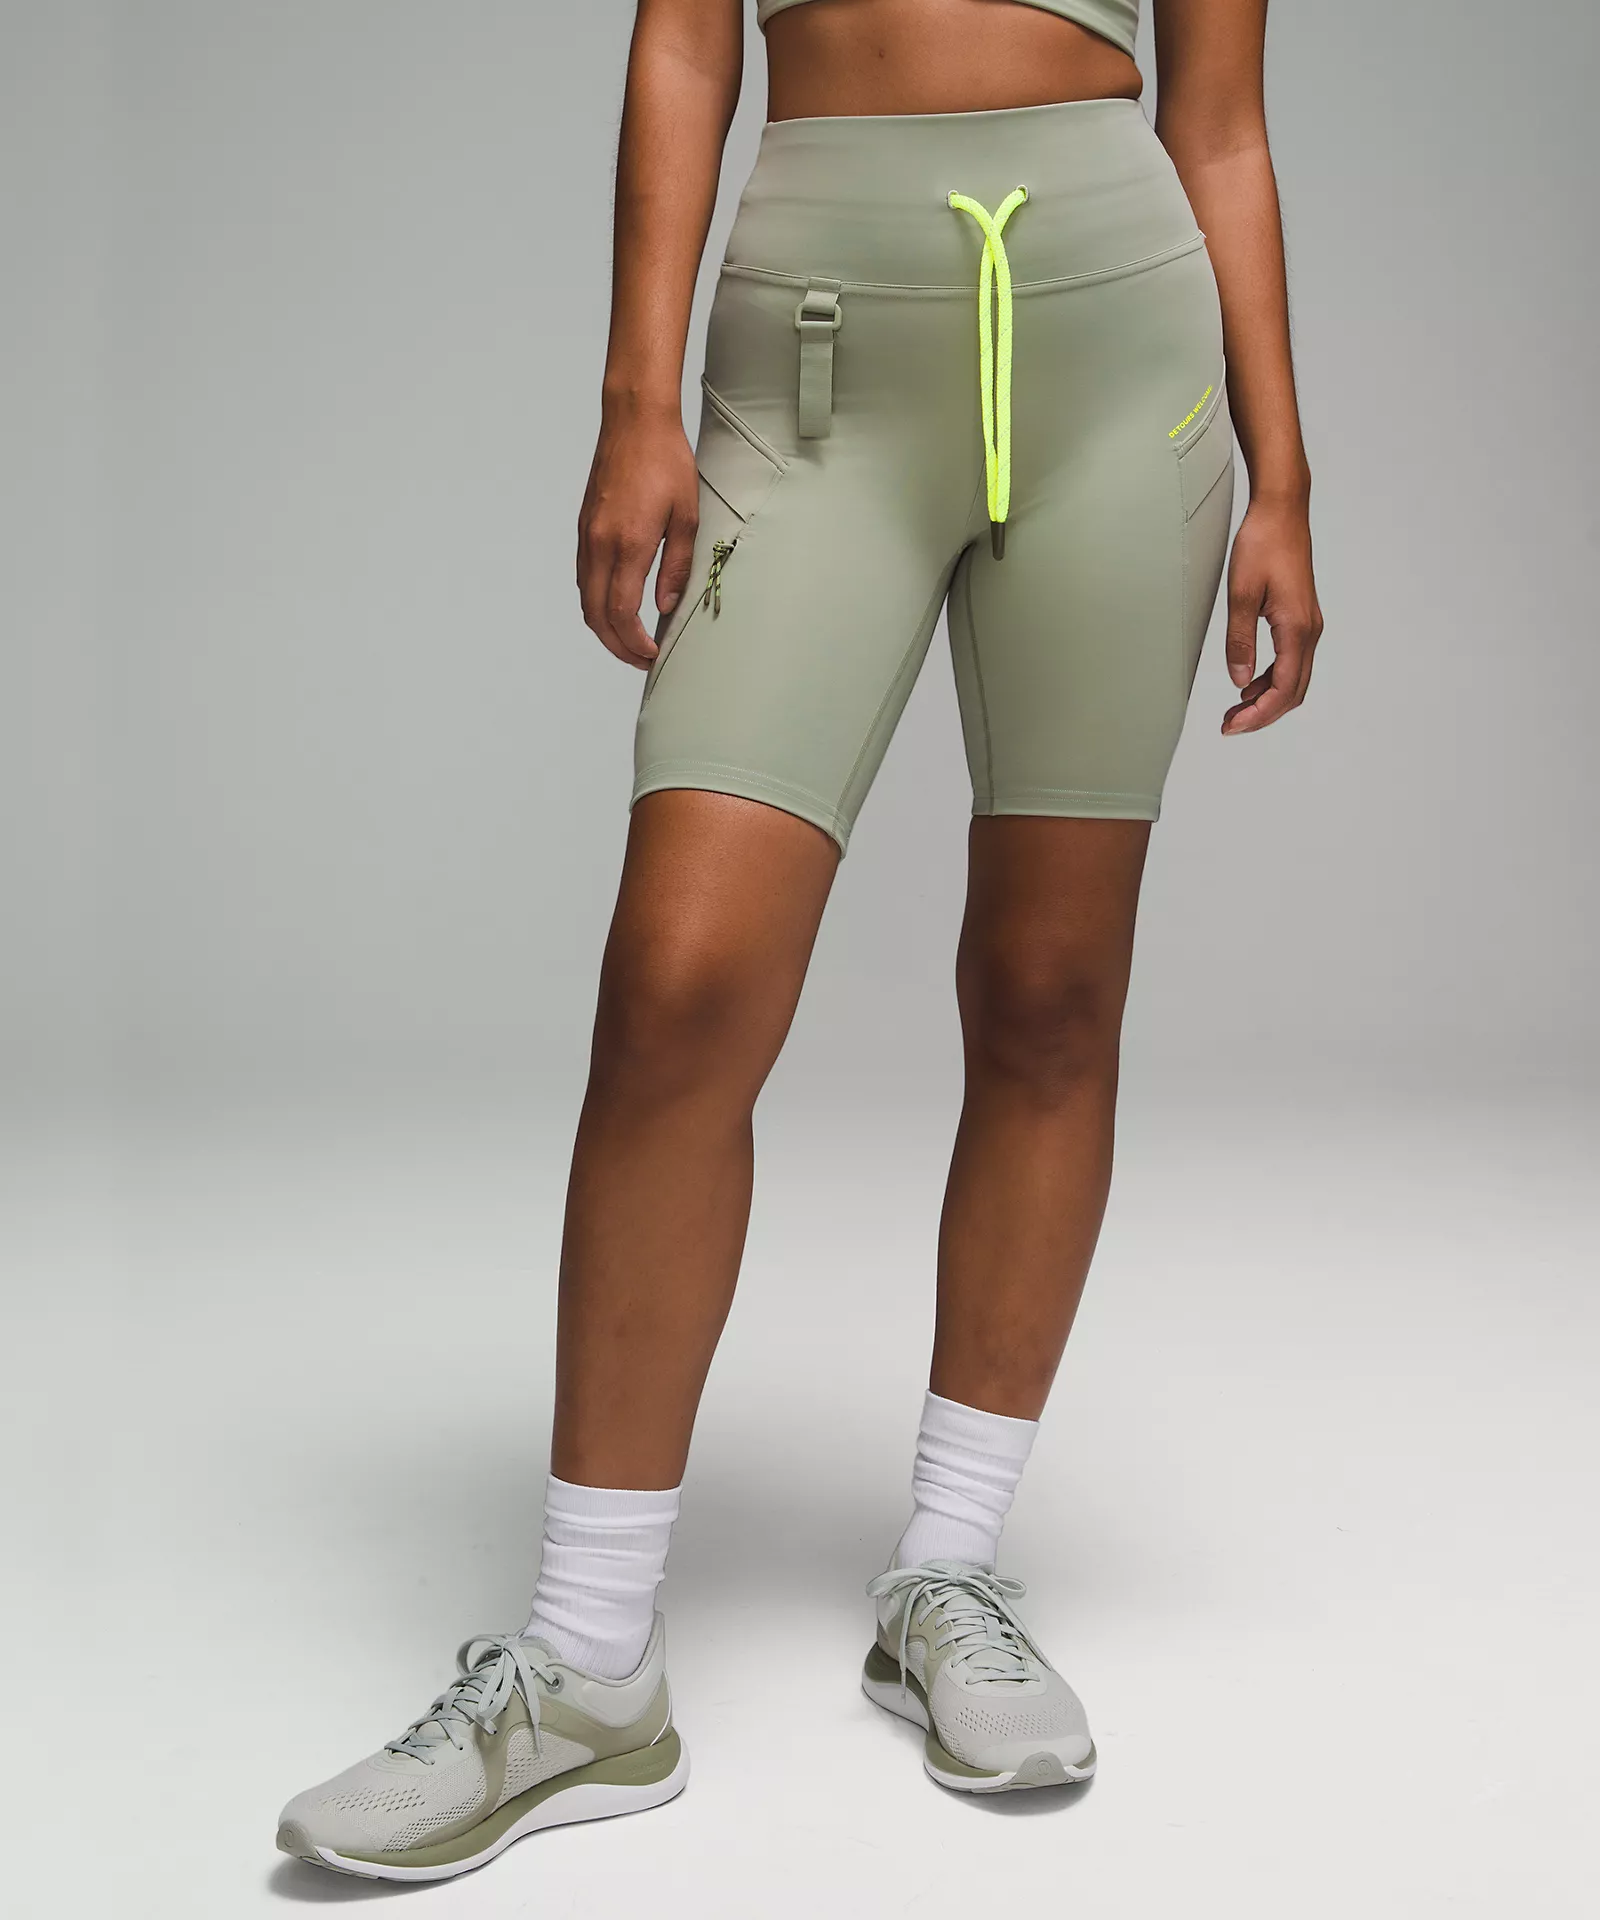 Lululemon Hotty Hot shorts vs  Dupe AND Free People The Way Home  shorts vs  Dupe Save your money friends - These dupes are t